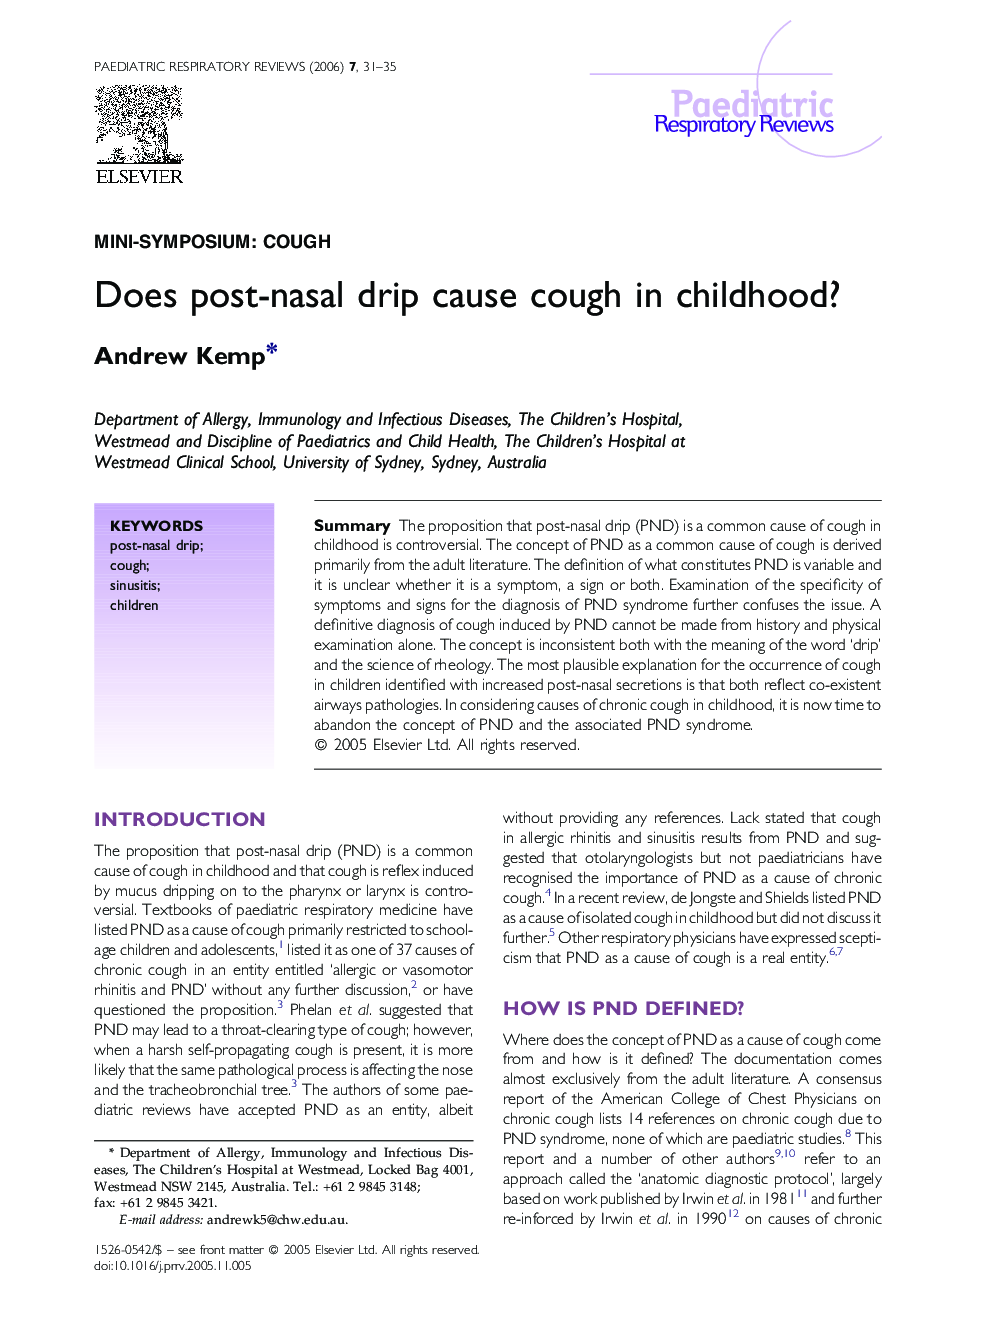 Does post-nasal drip cause cough in childhood?